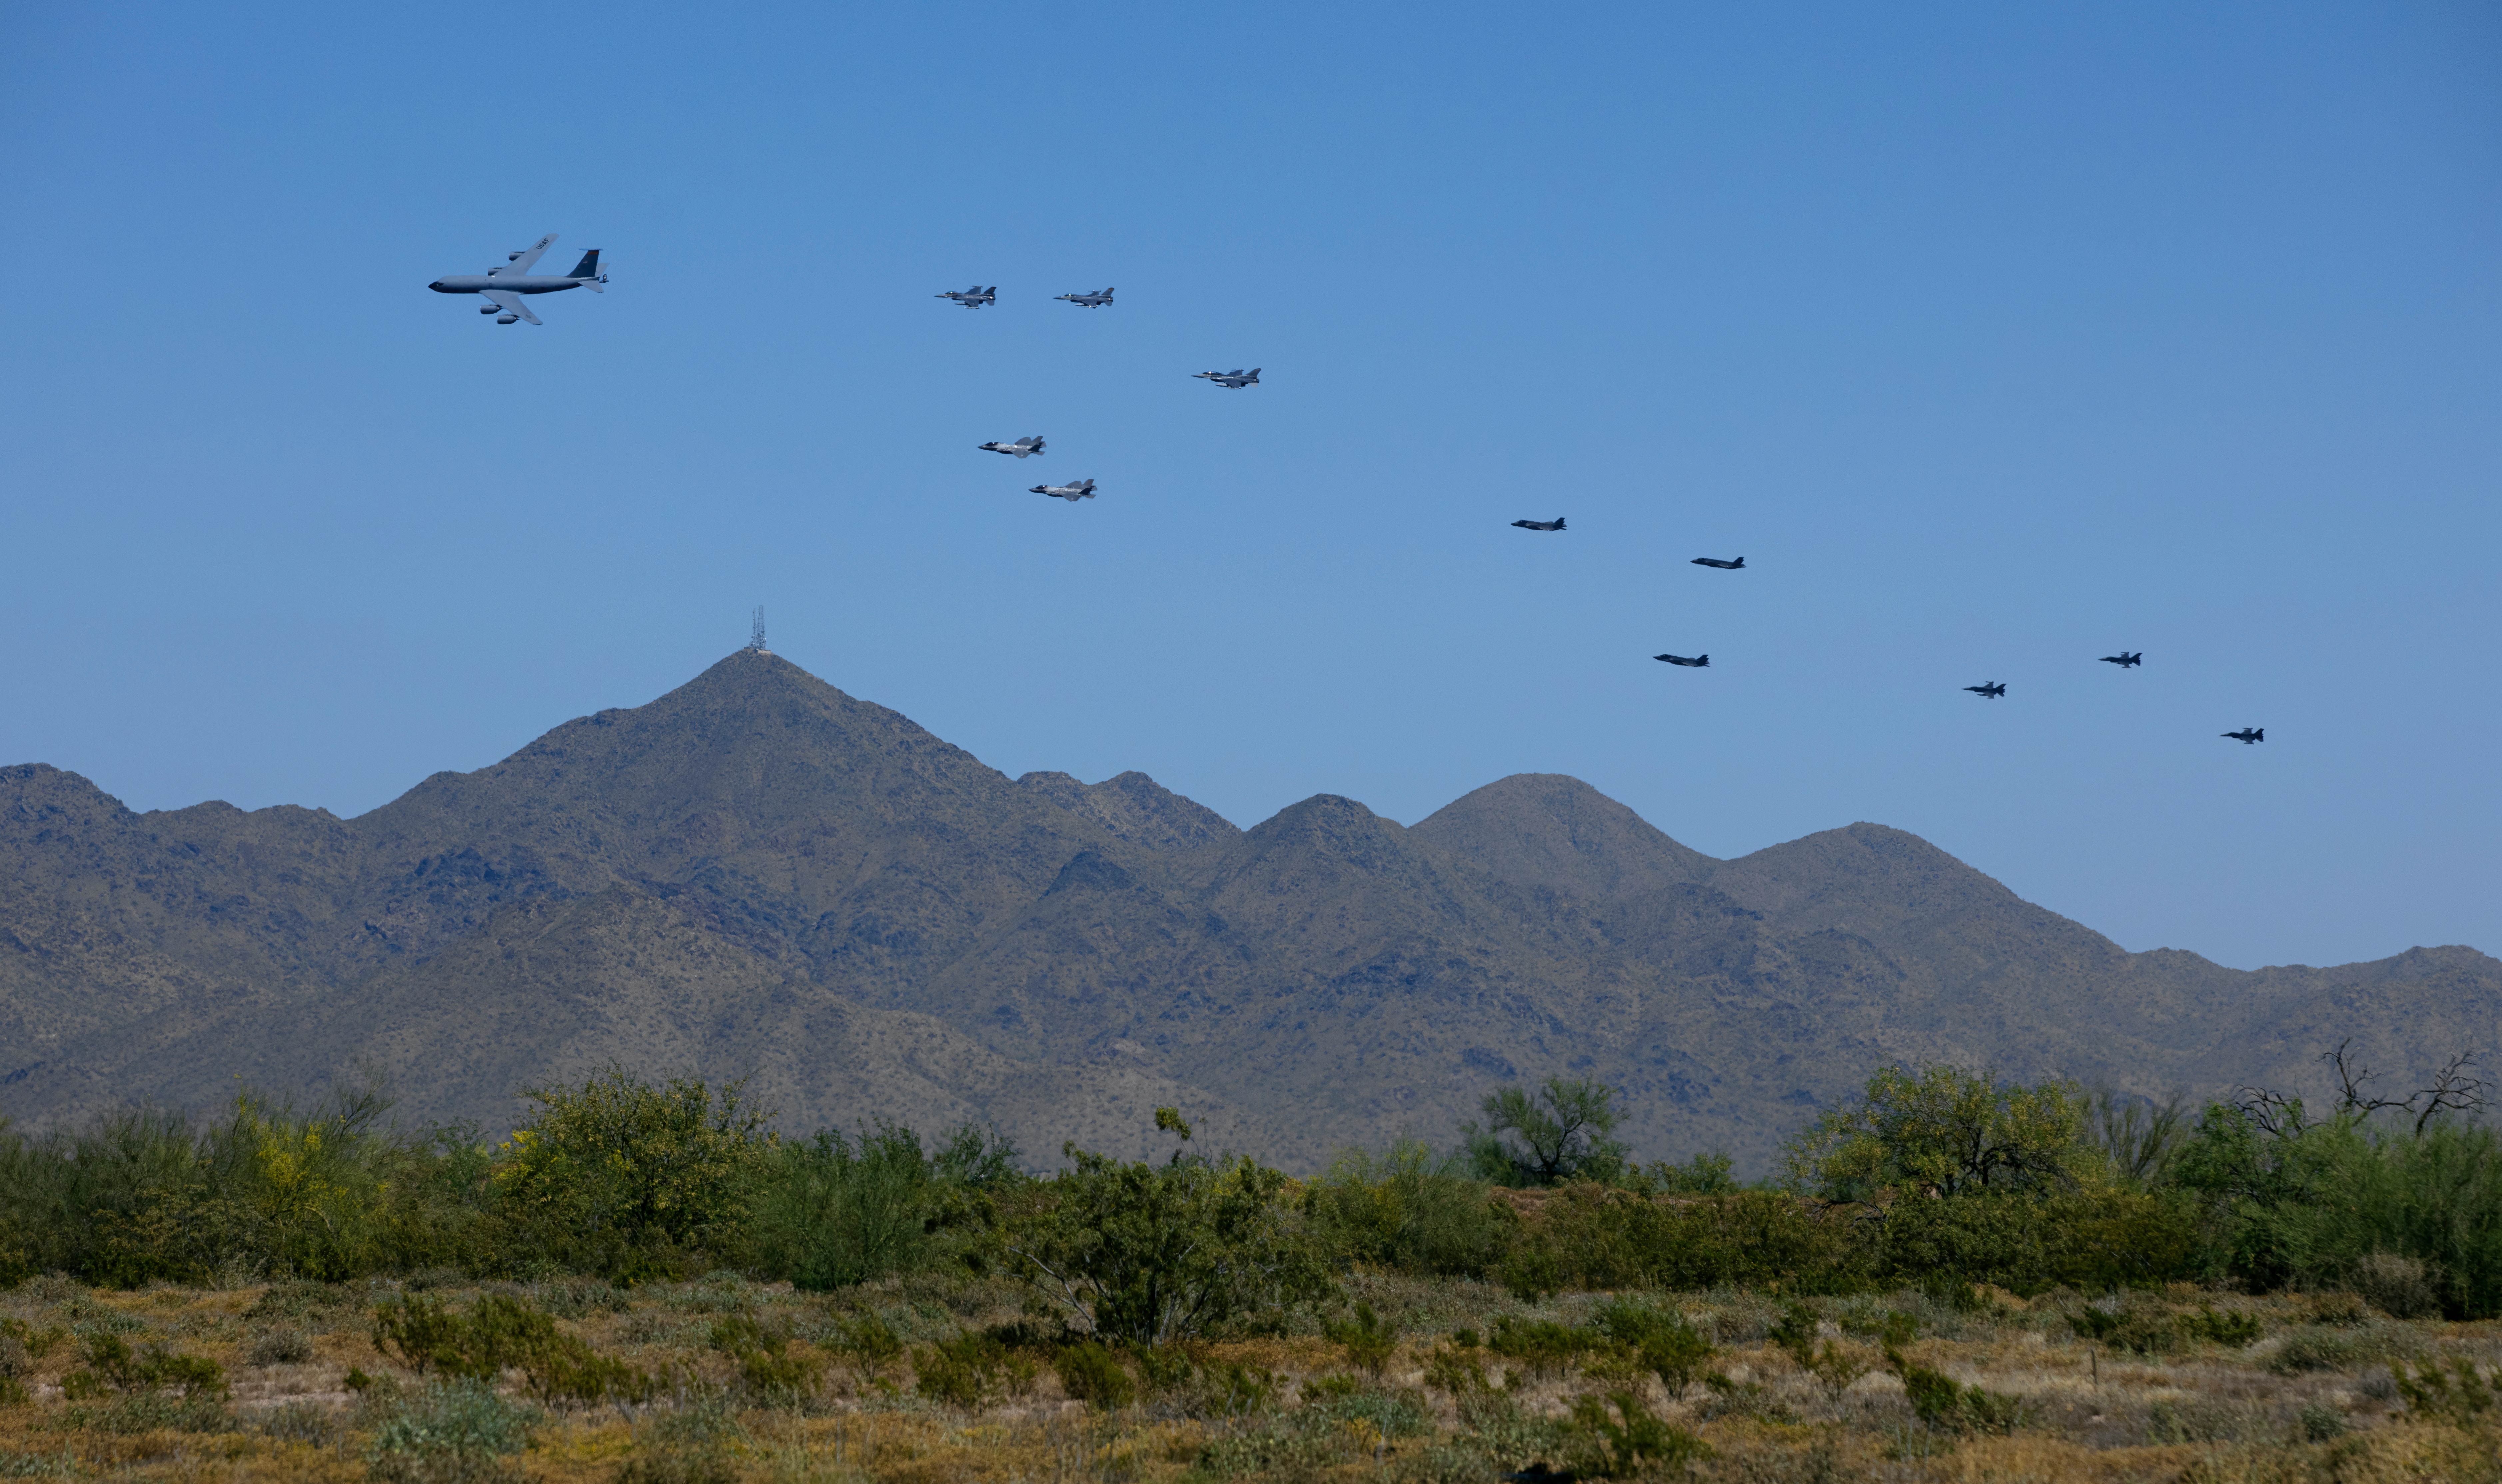 Covid Flight from Luke AFB in May 2020